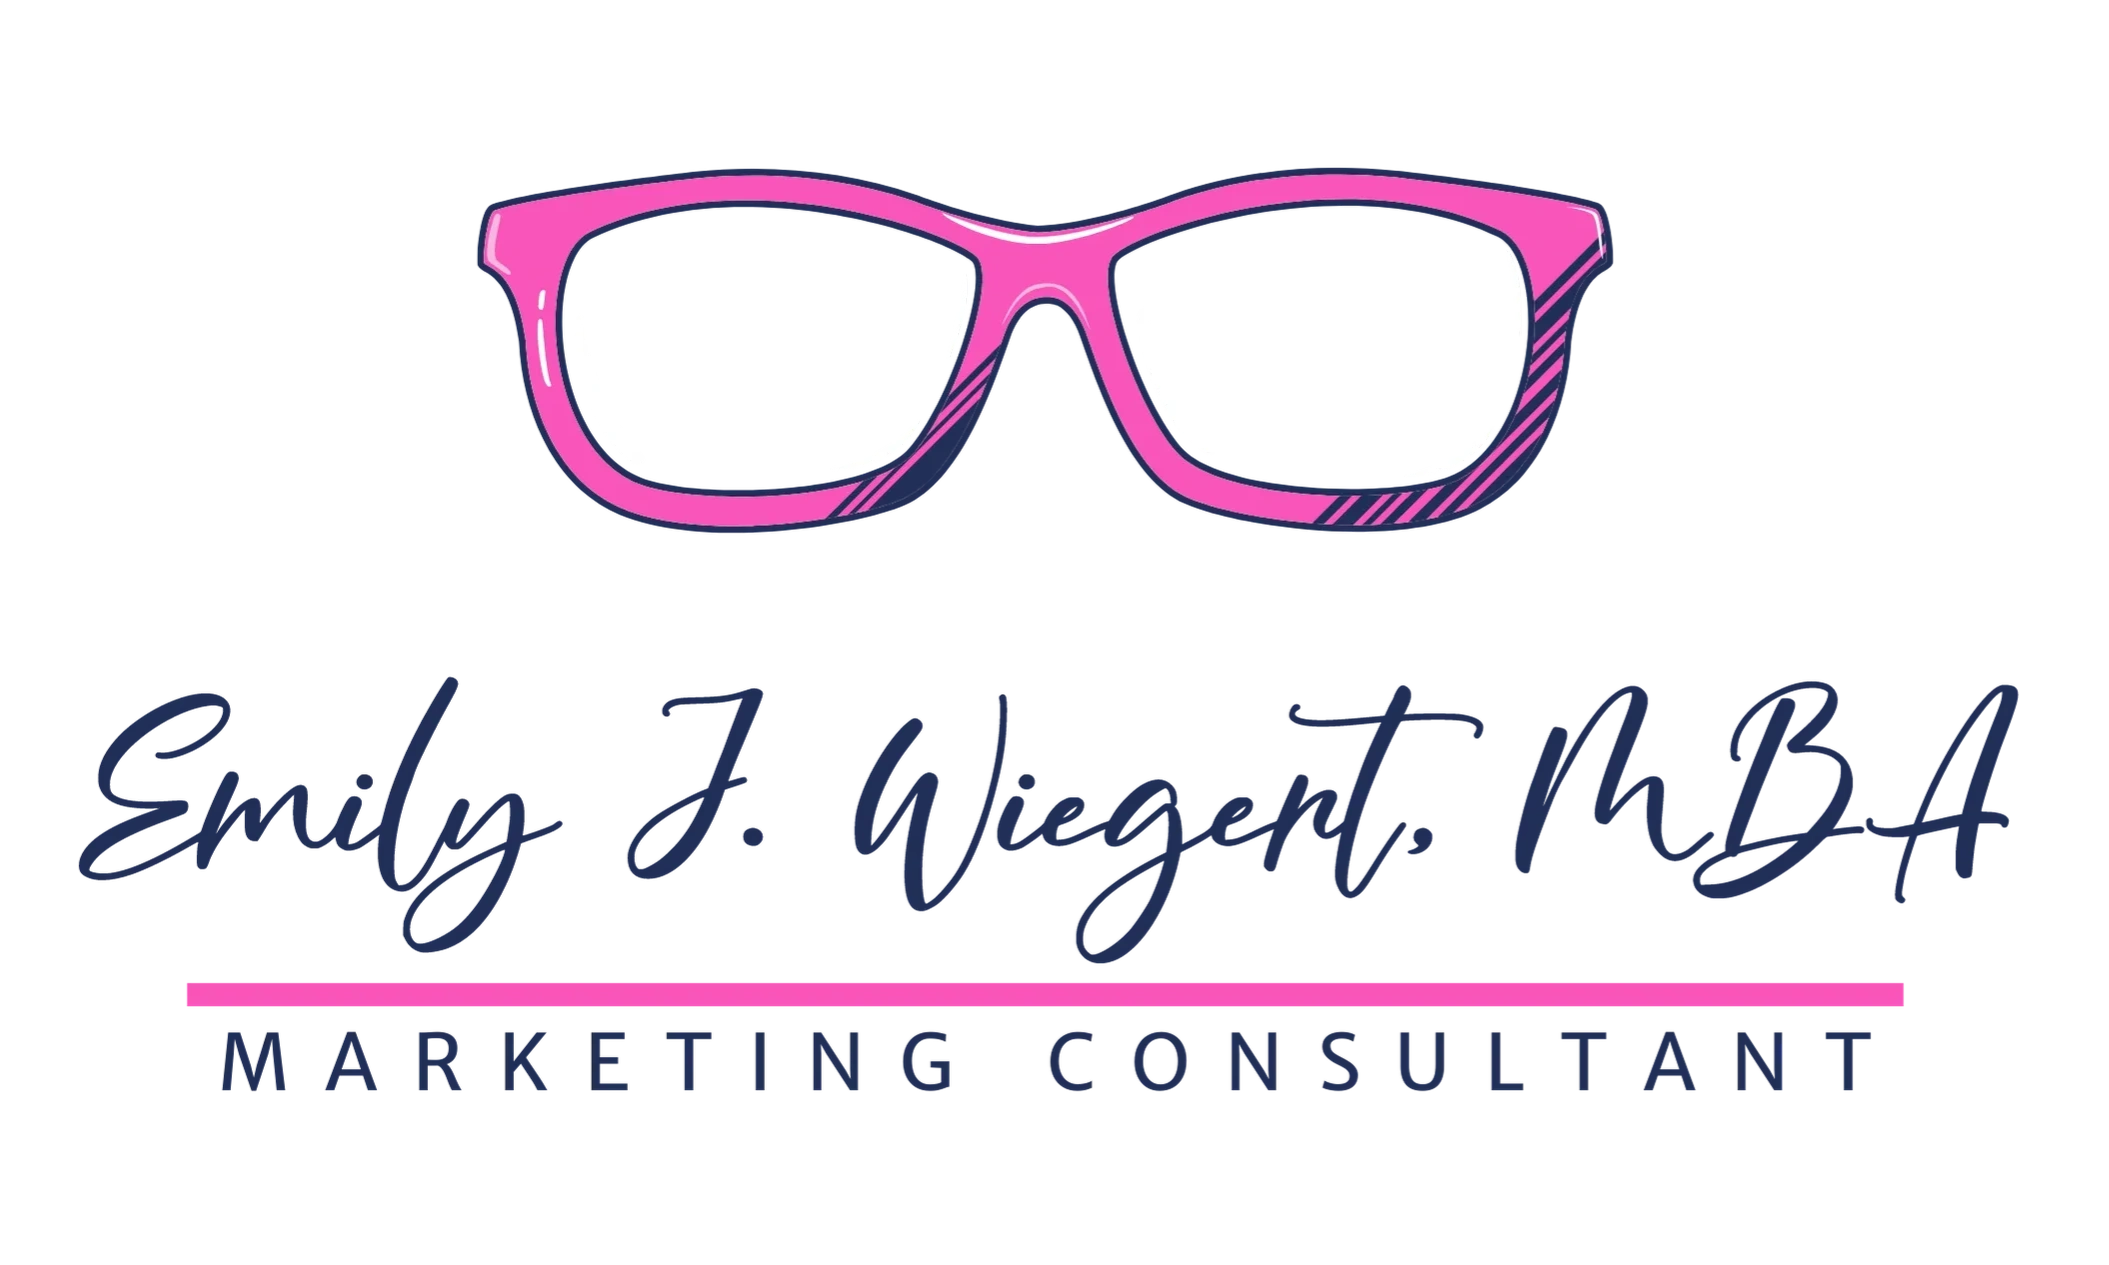 Emily J Wiegert MBA Marketing Consultant with hot pink classes